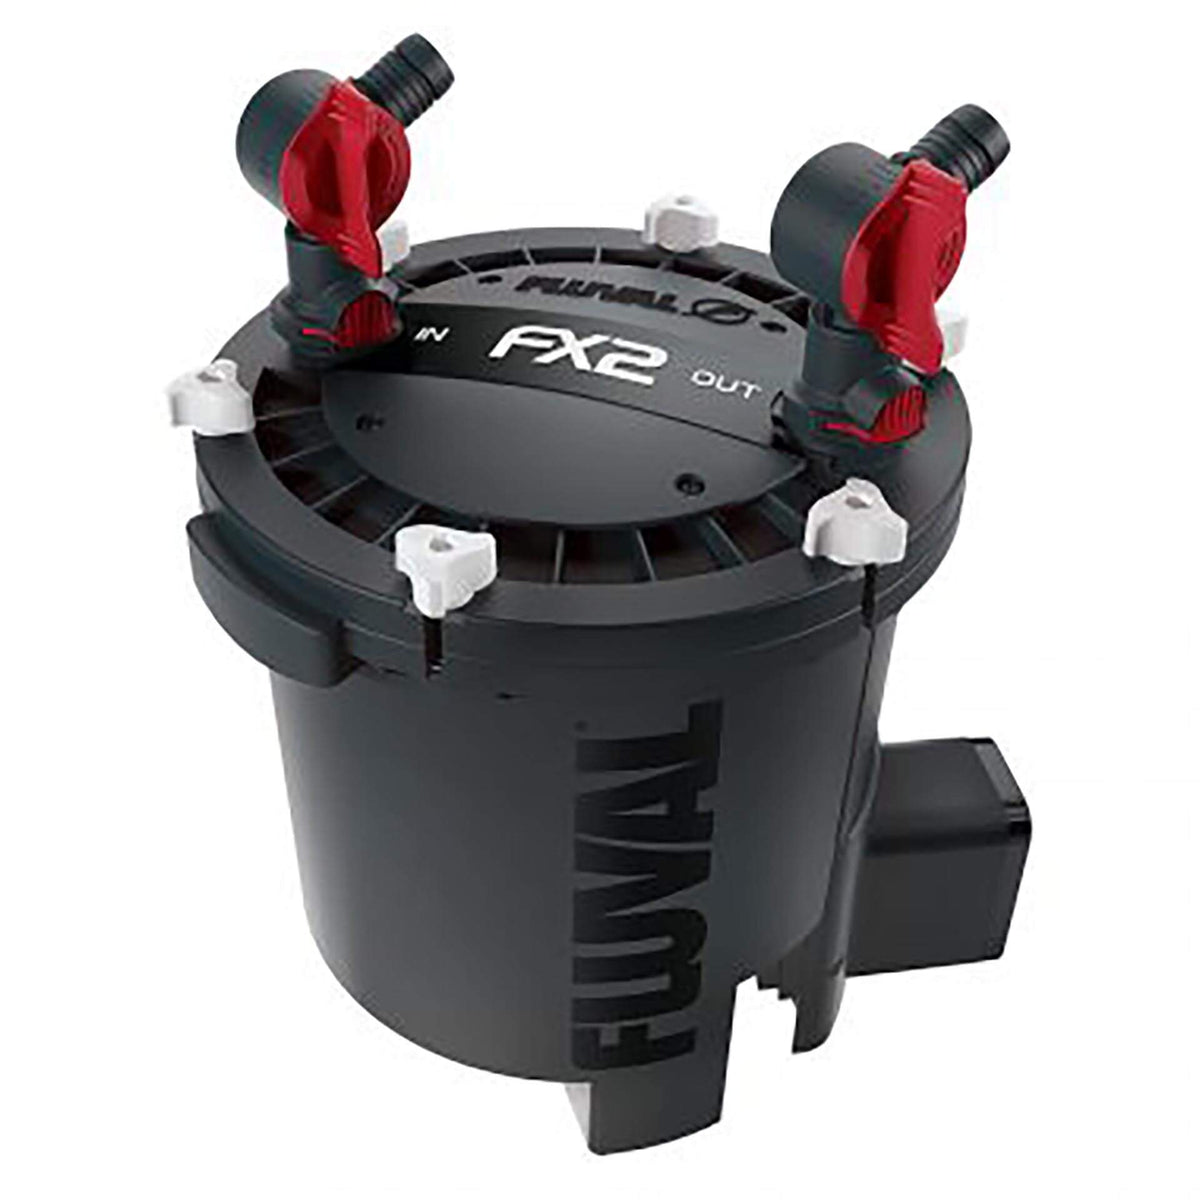 Fluval FX2 High Performance Canister Filter, up to 750 L